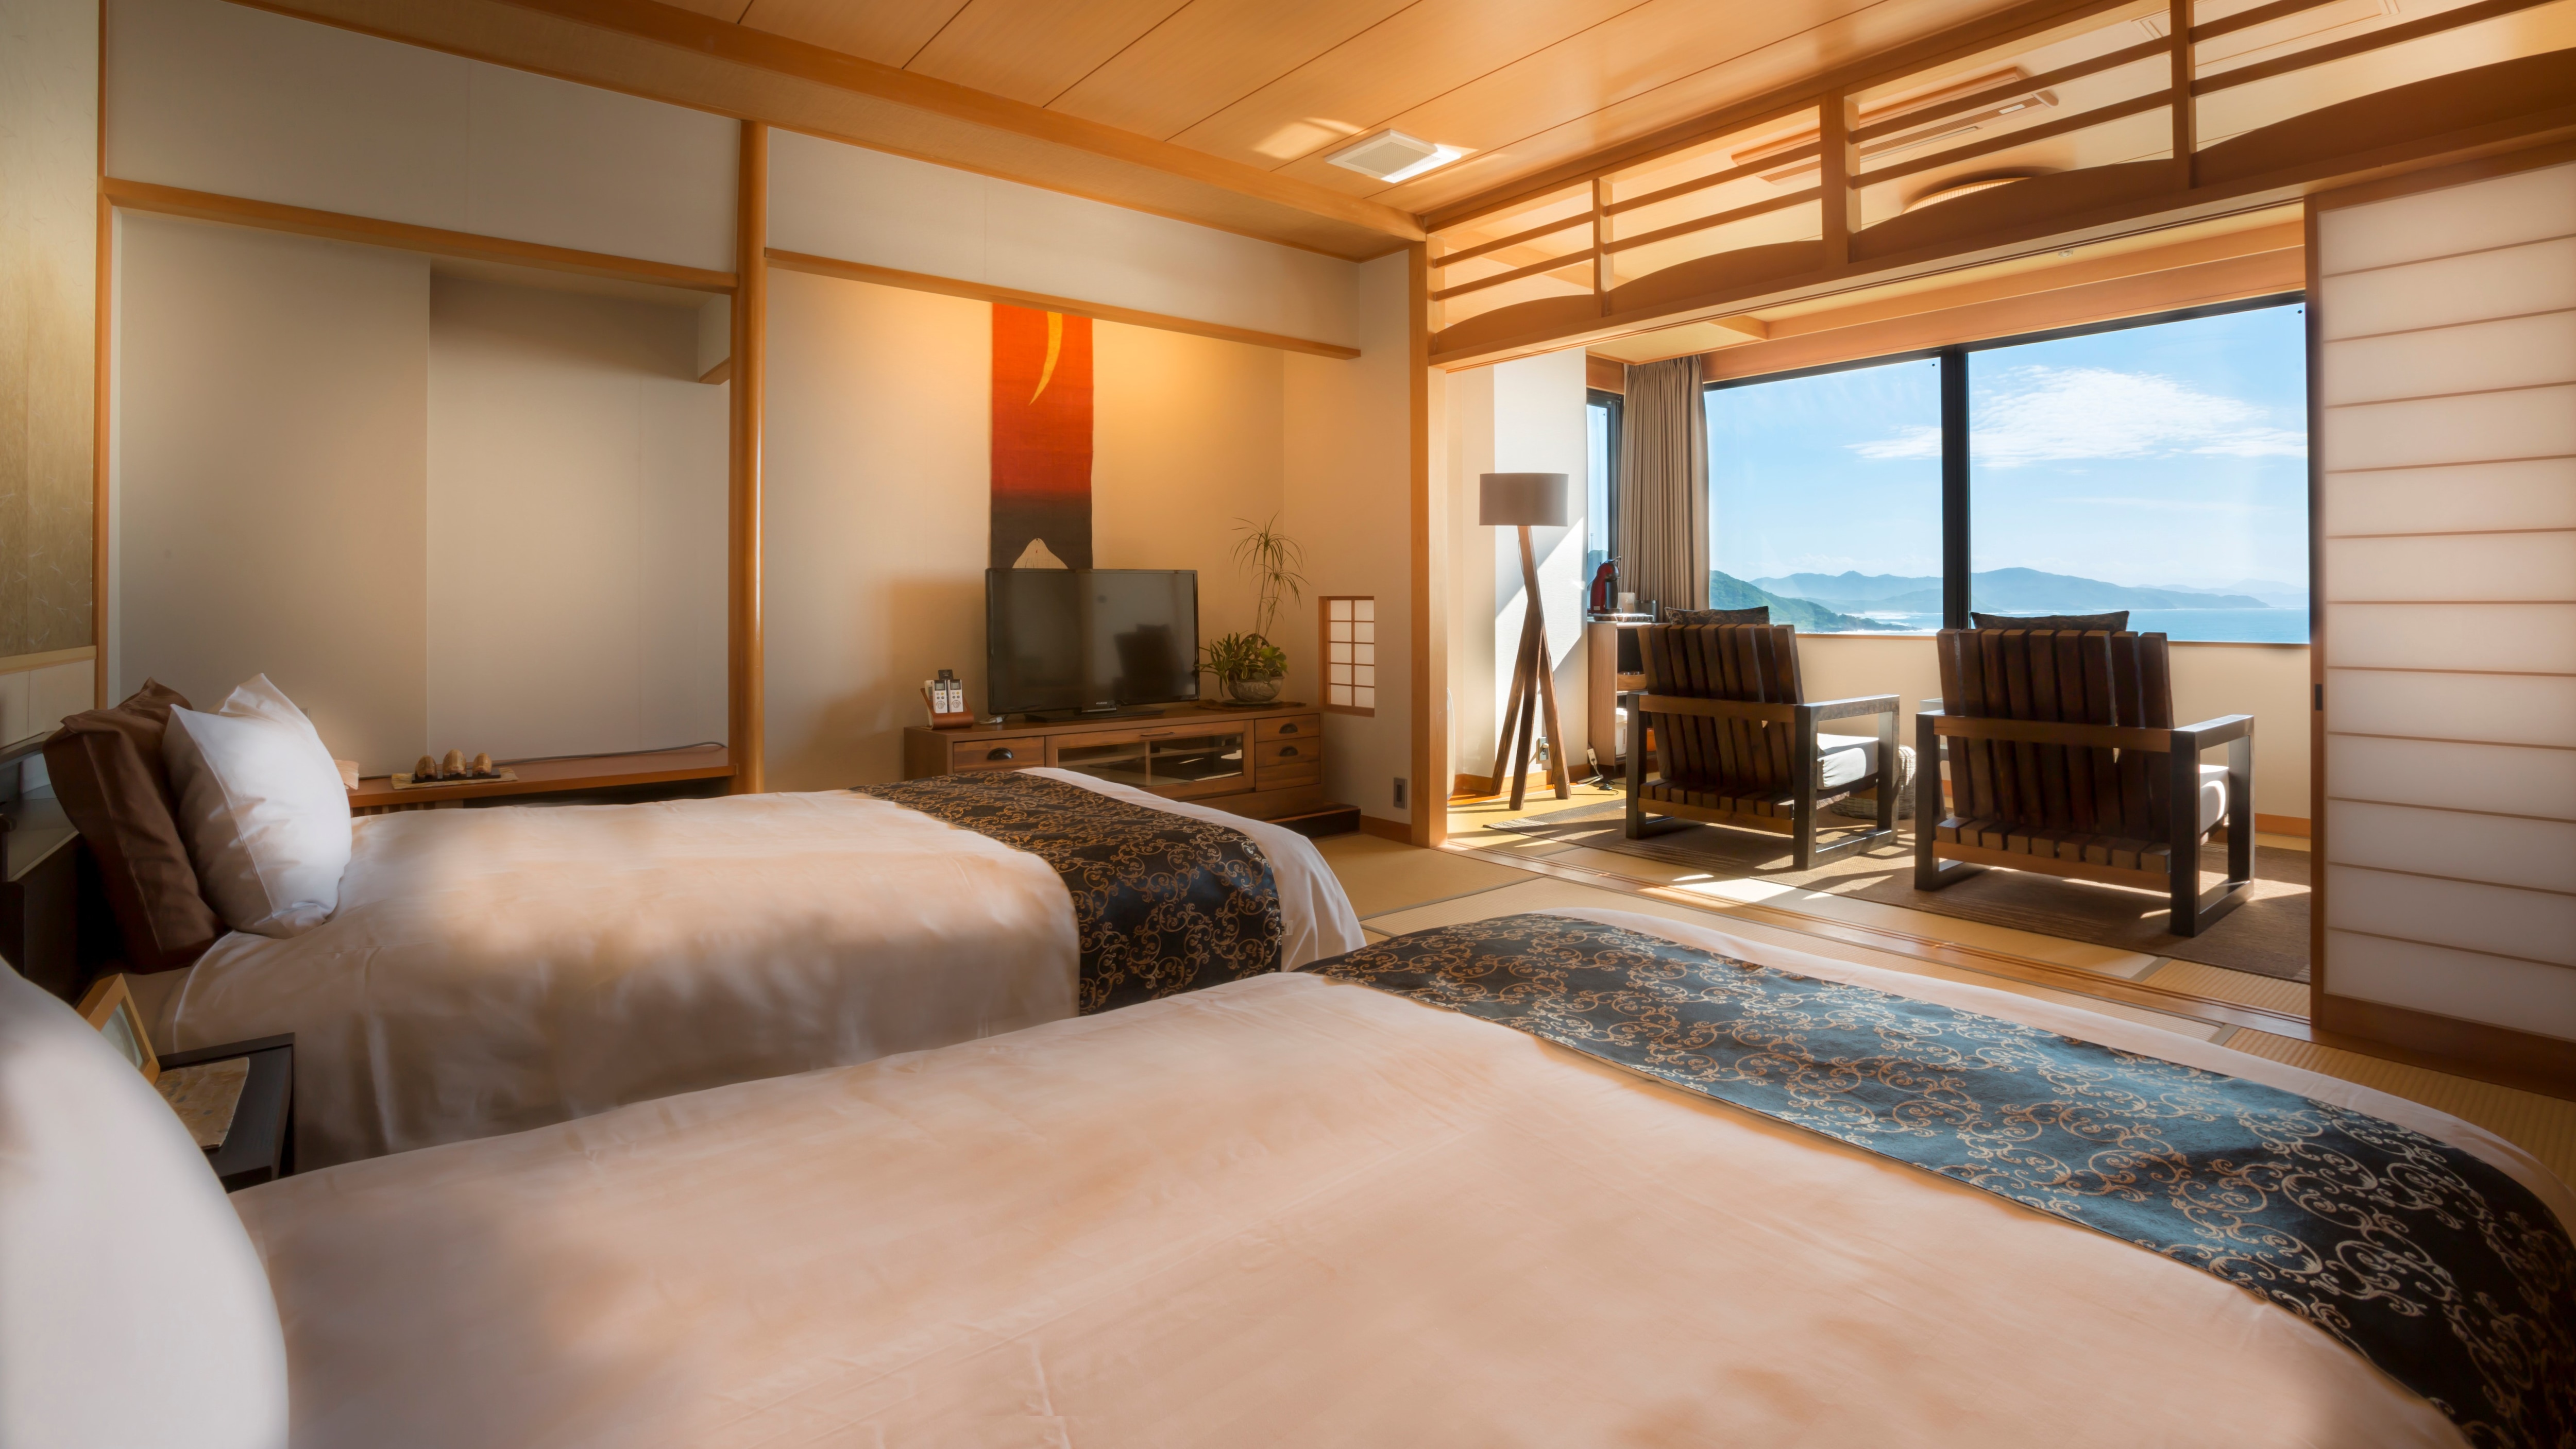 [Top floor special room "Tenkai"] From the ocean view guest room, you can overlook the beautiful sea like a painting.